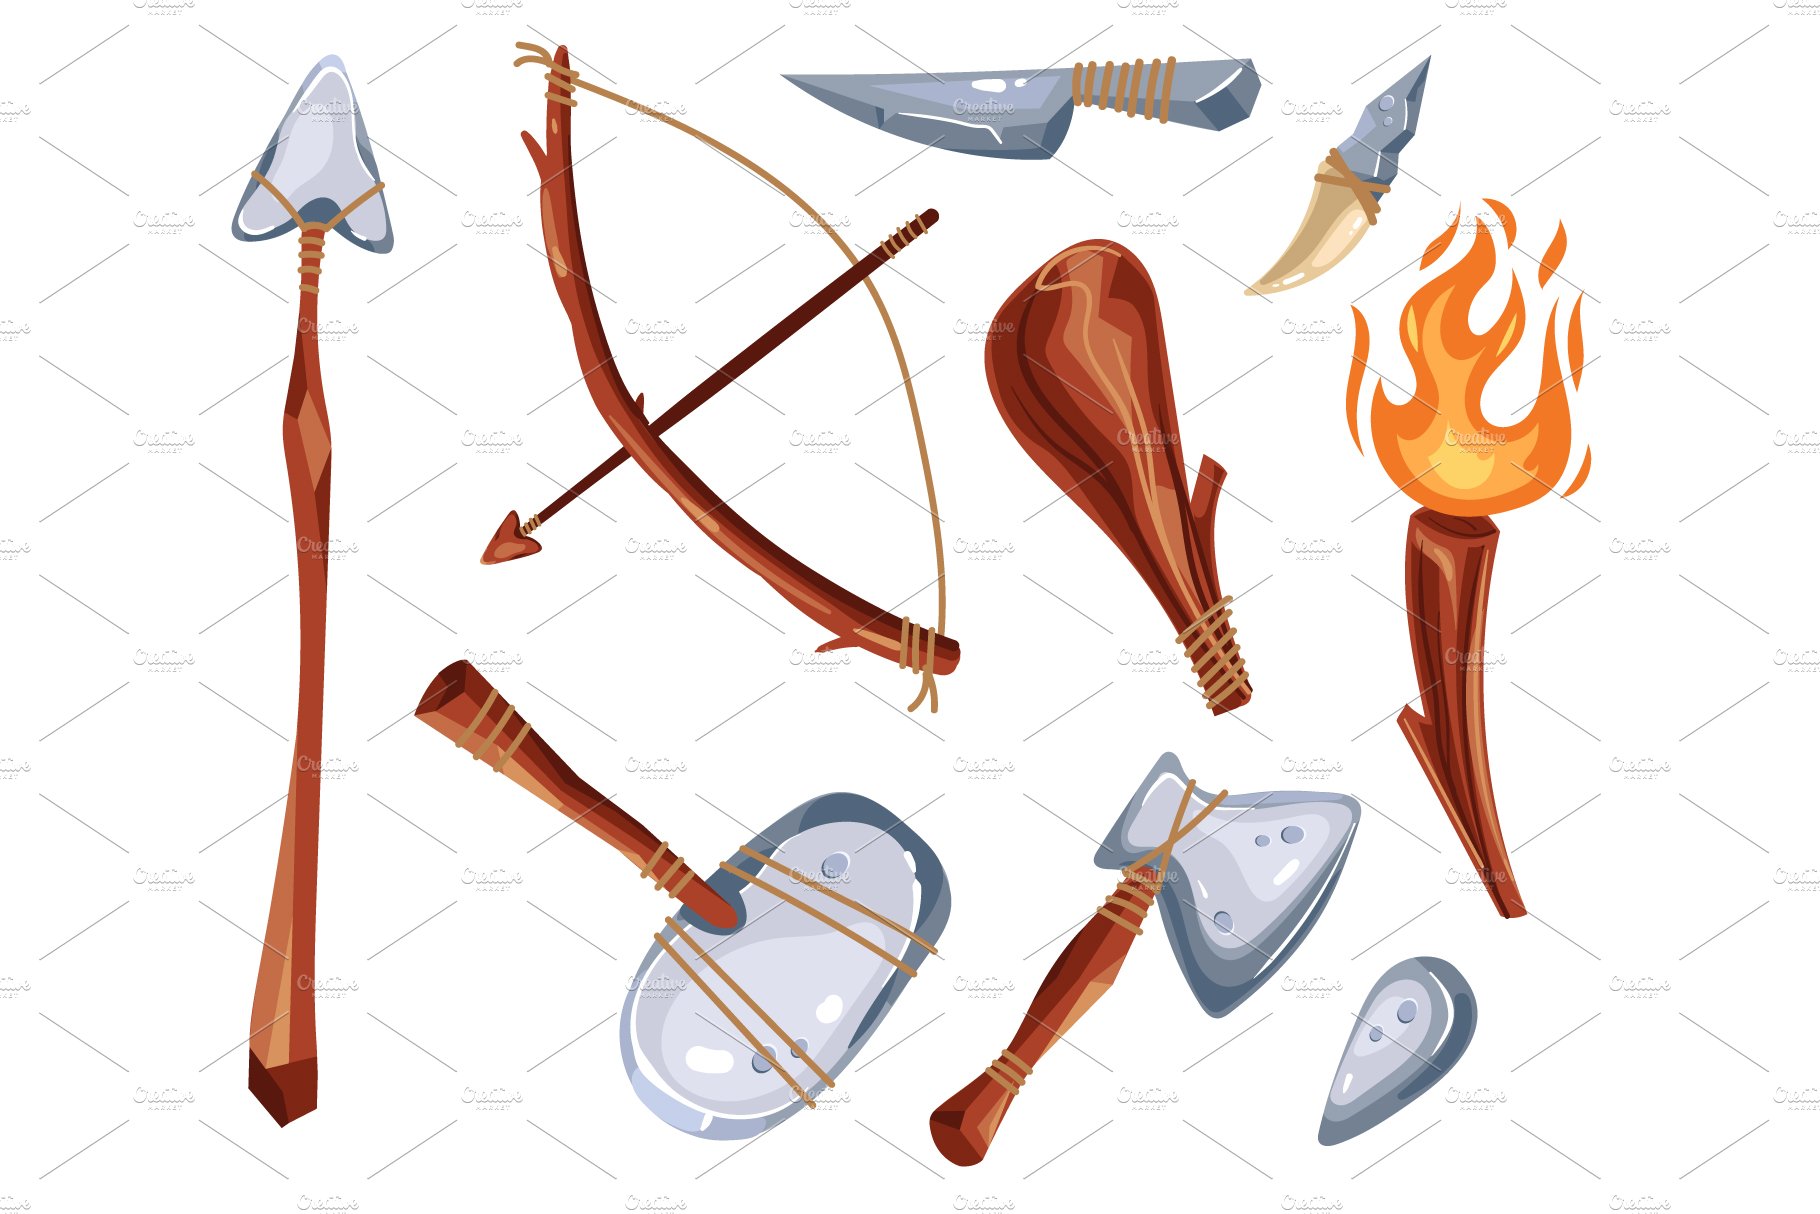 Prehistoric archaeology weapons set cover image.